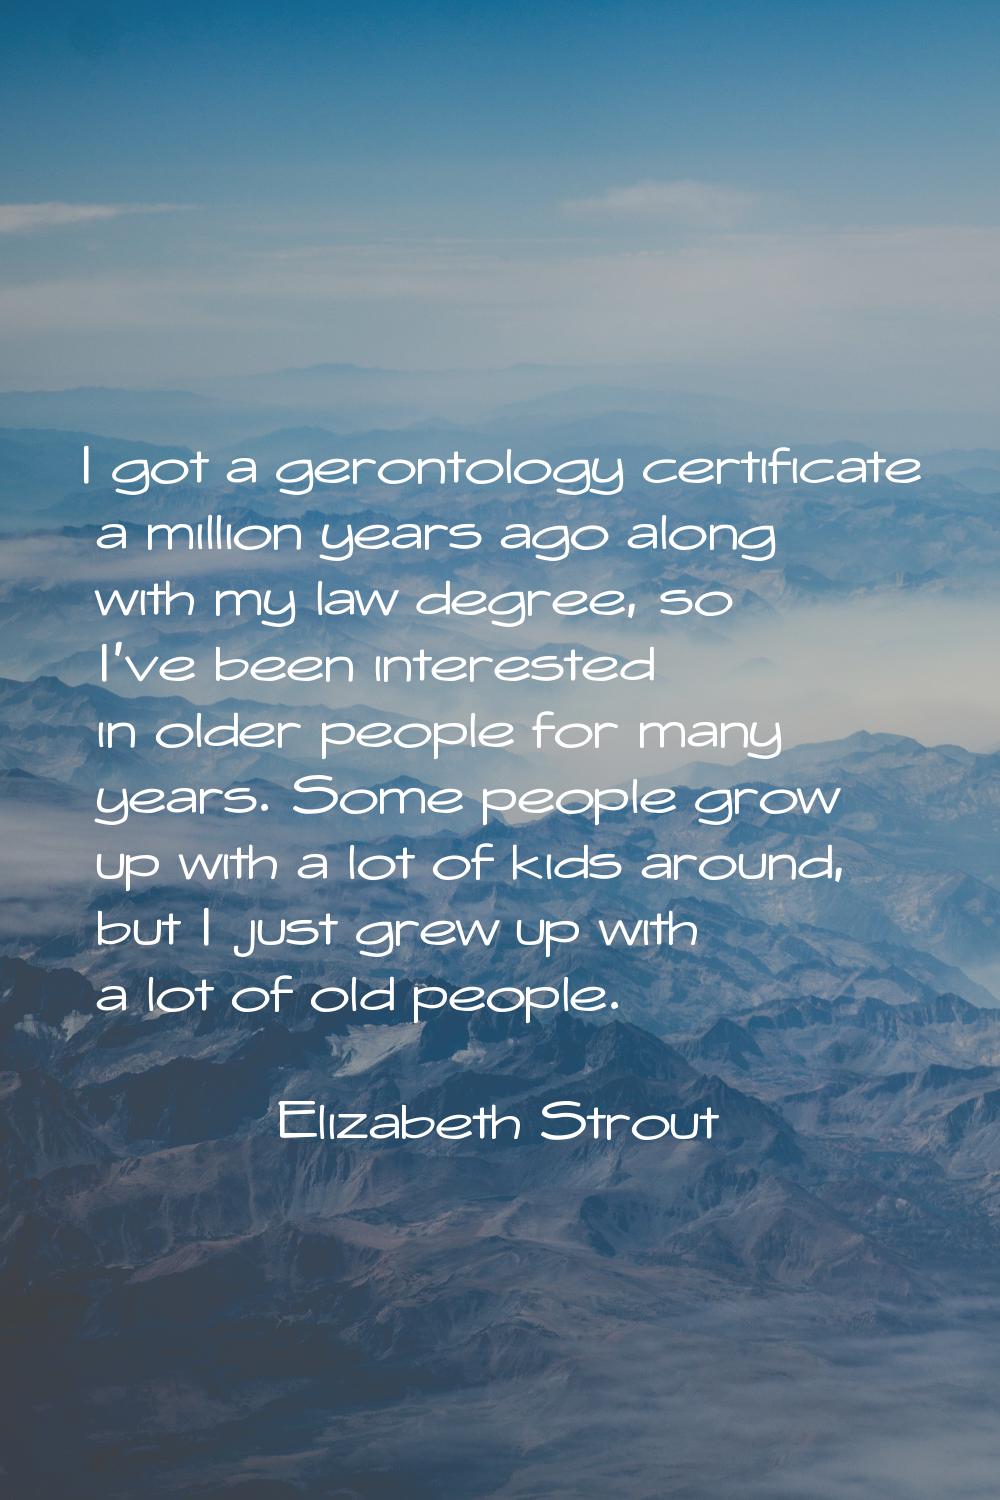 I got a gerontology certificate a million years ago along with my law degree, so I've been interest